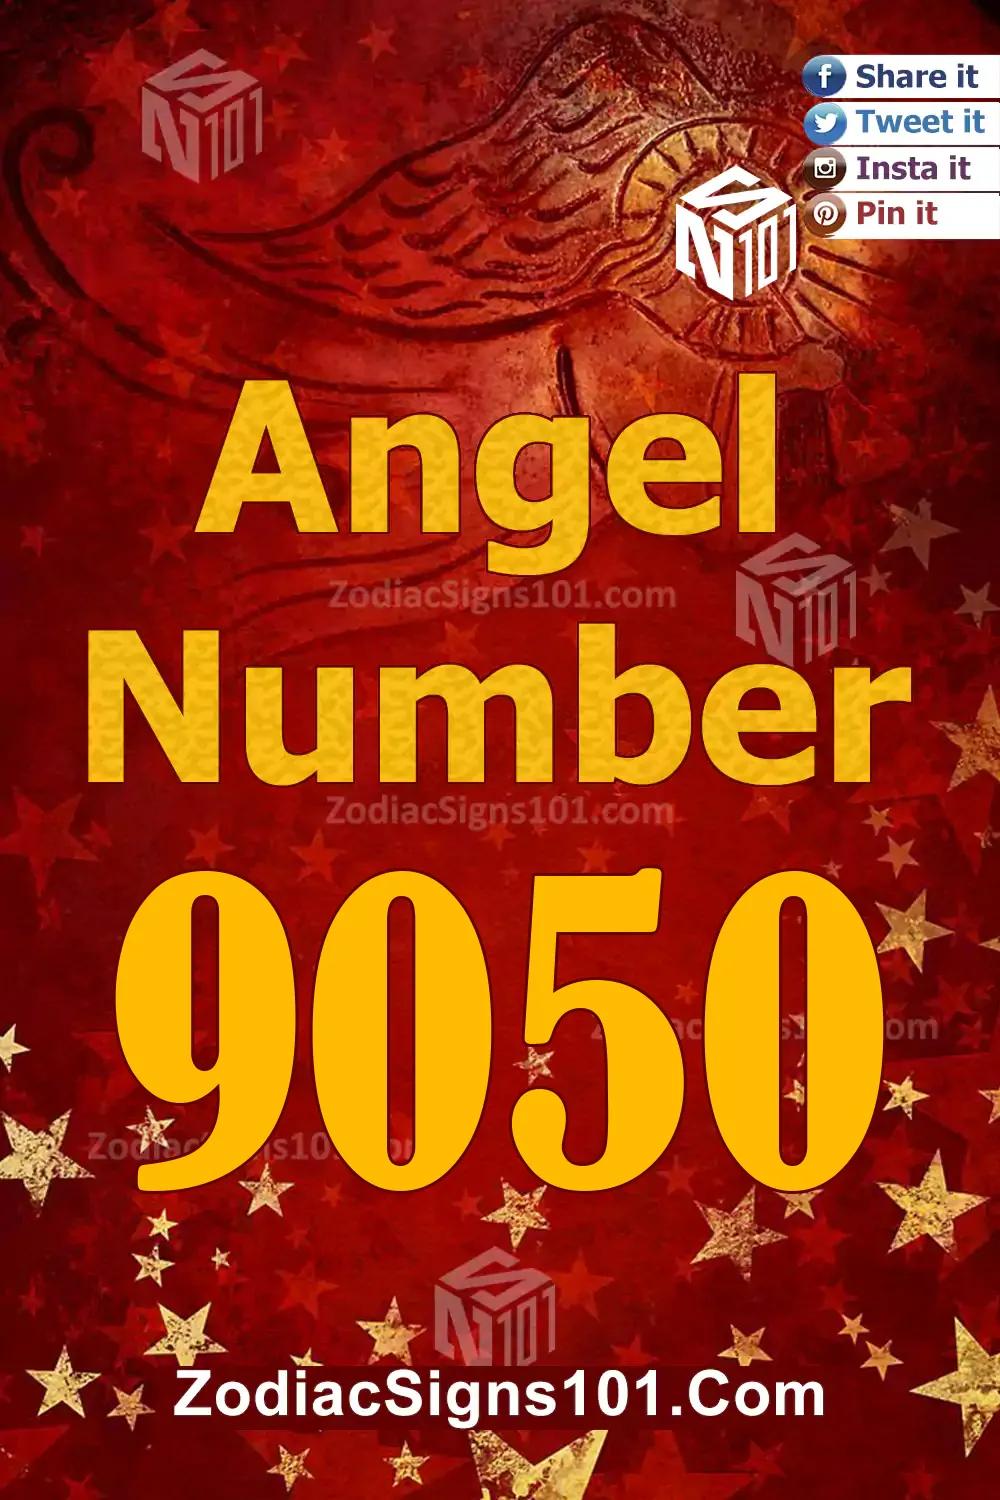 9050 Angel Number Meaning